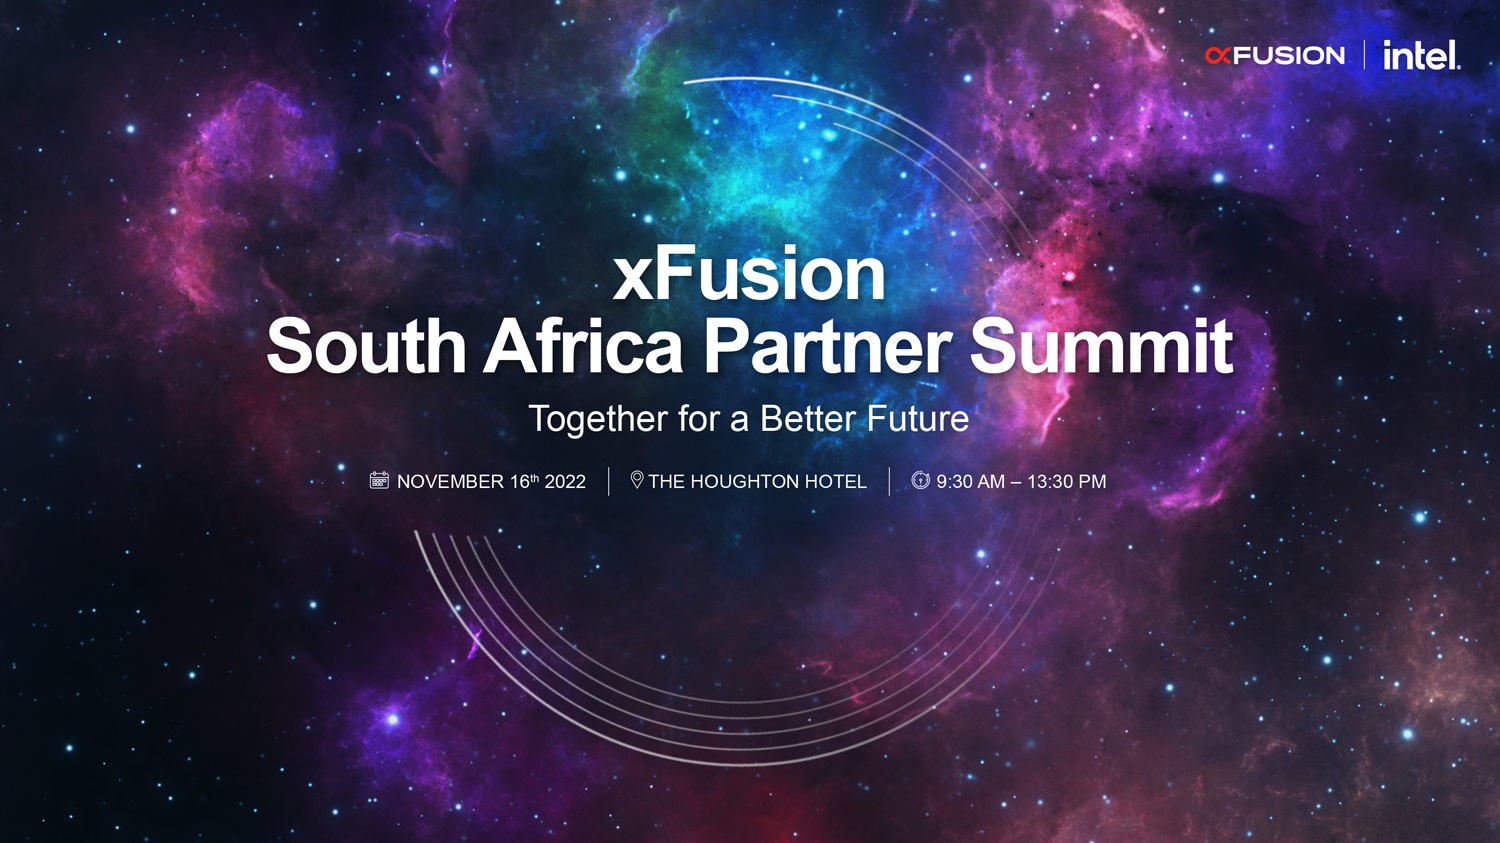 xFusion Hosts South Africa Partner Summit to Create Industry Value and Enable a Better Future